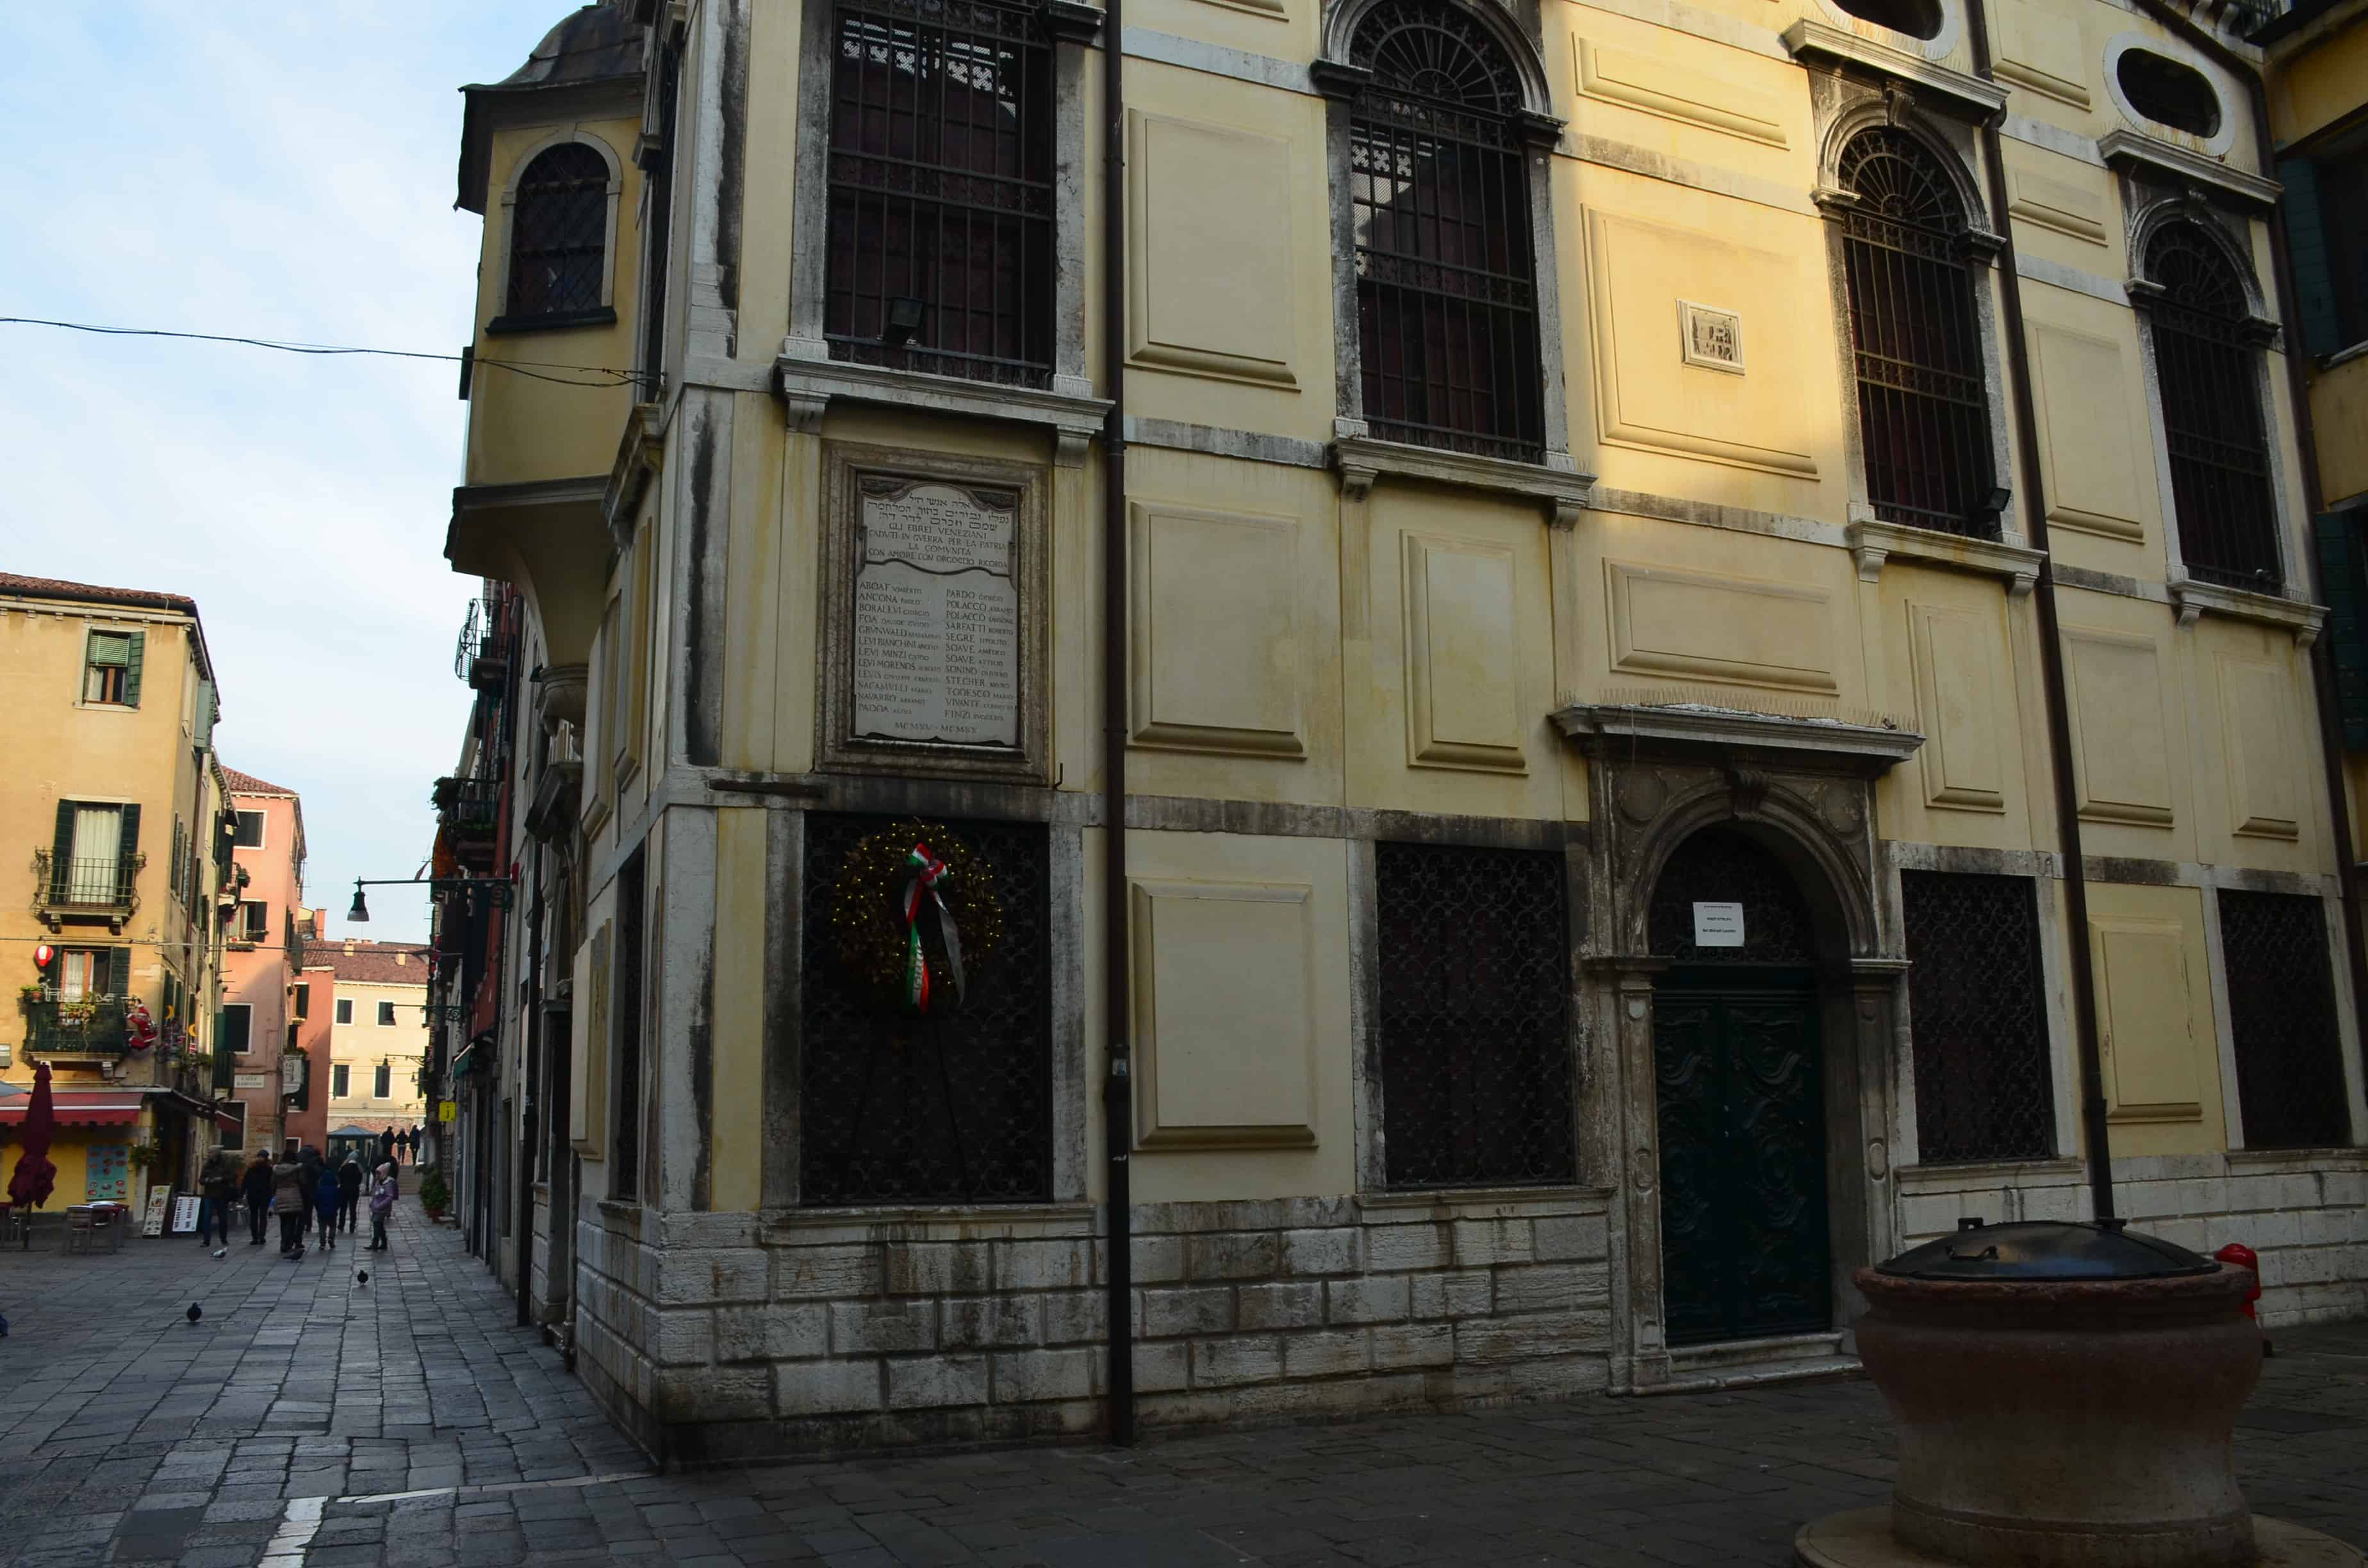 Levantine Synagogue in Venice, Italy